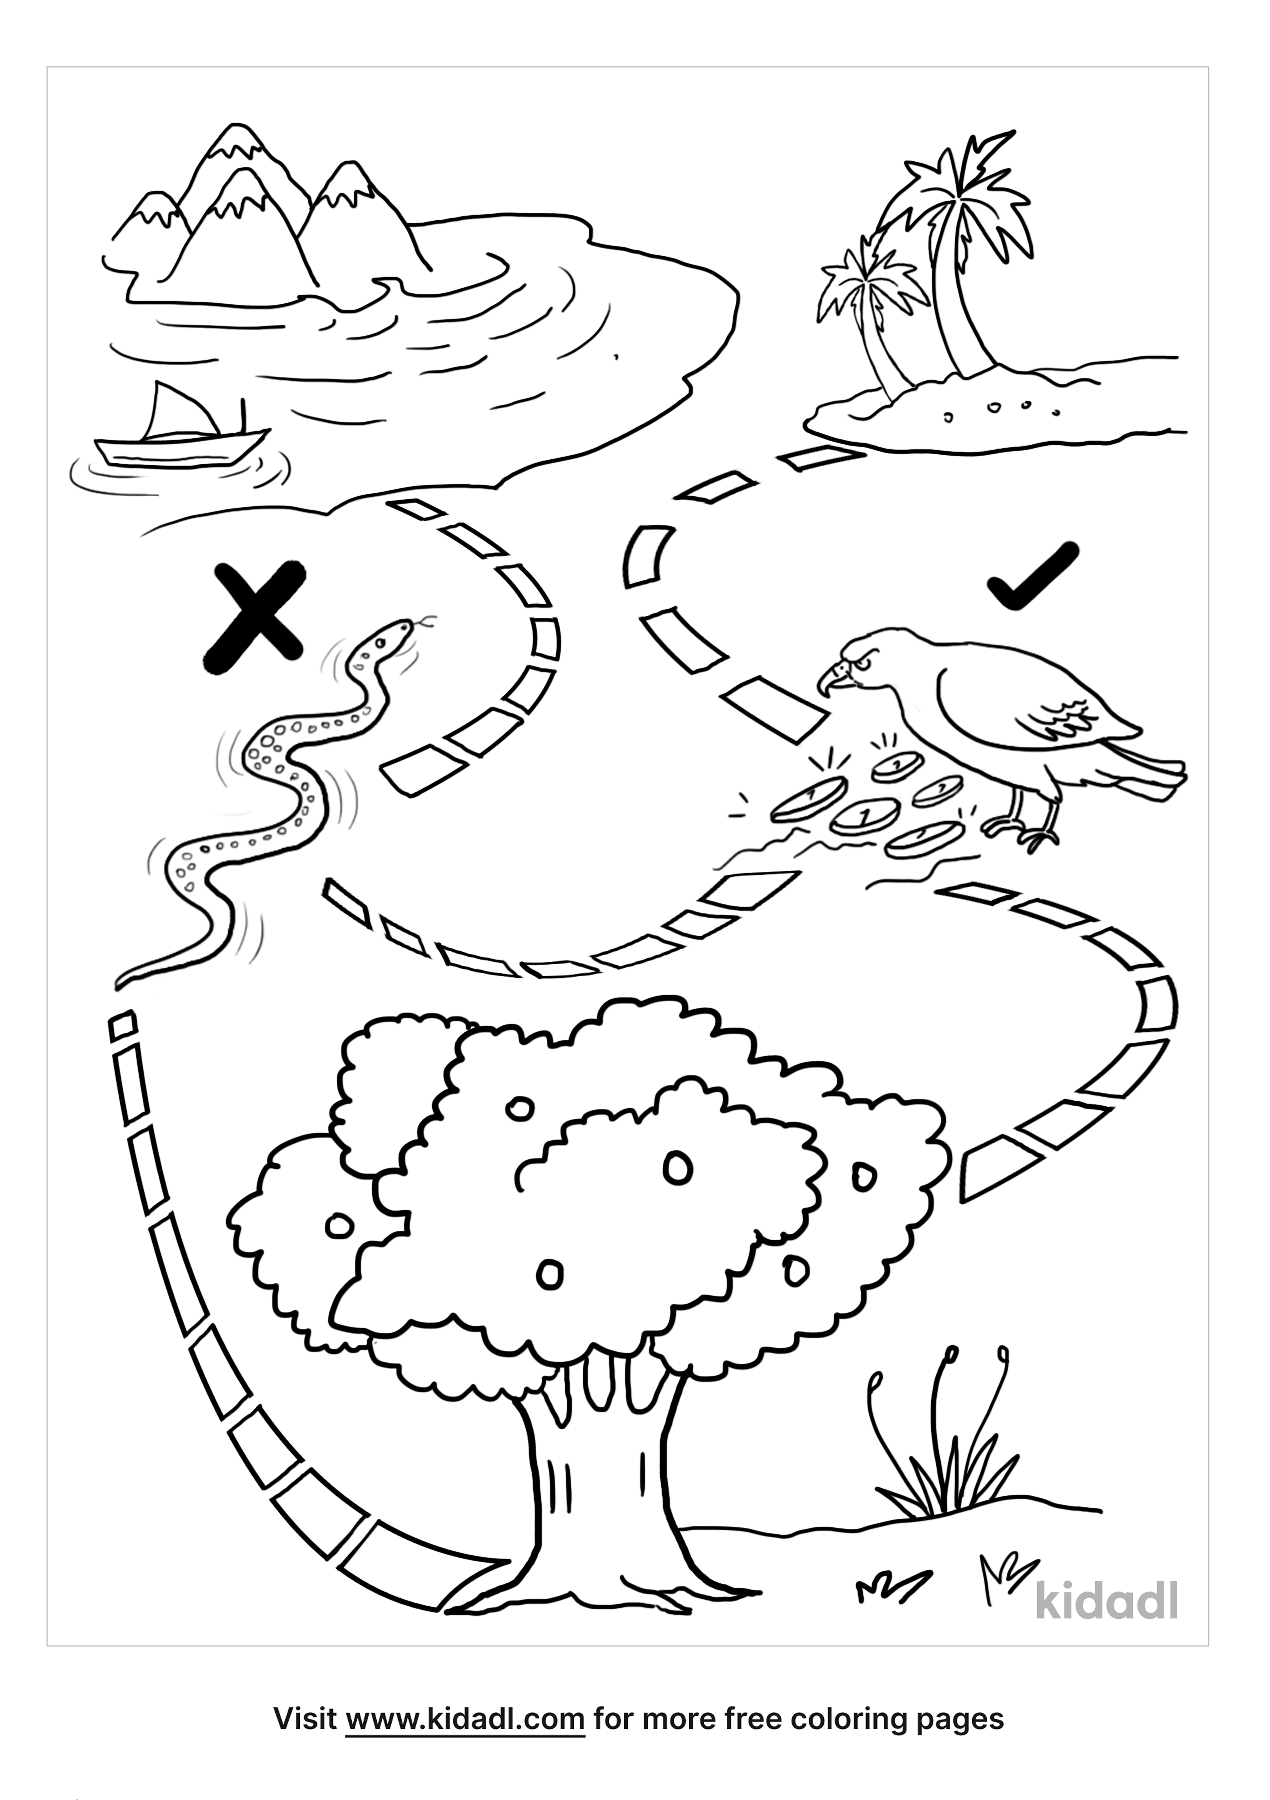 treasure map coloring pages free fun coloring pages kidadl coloring home